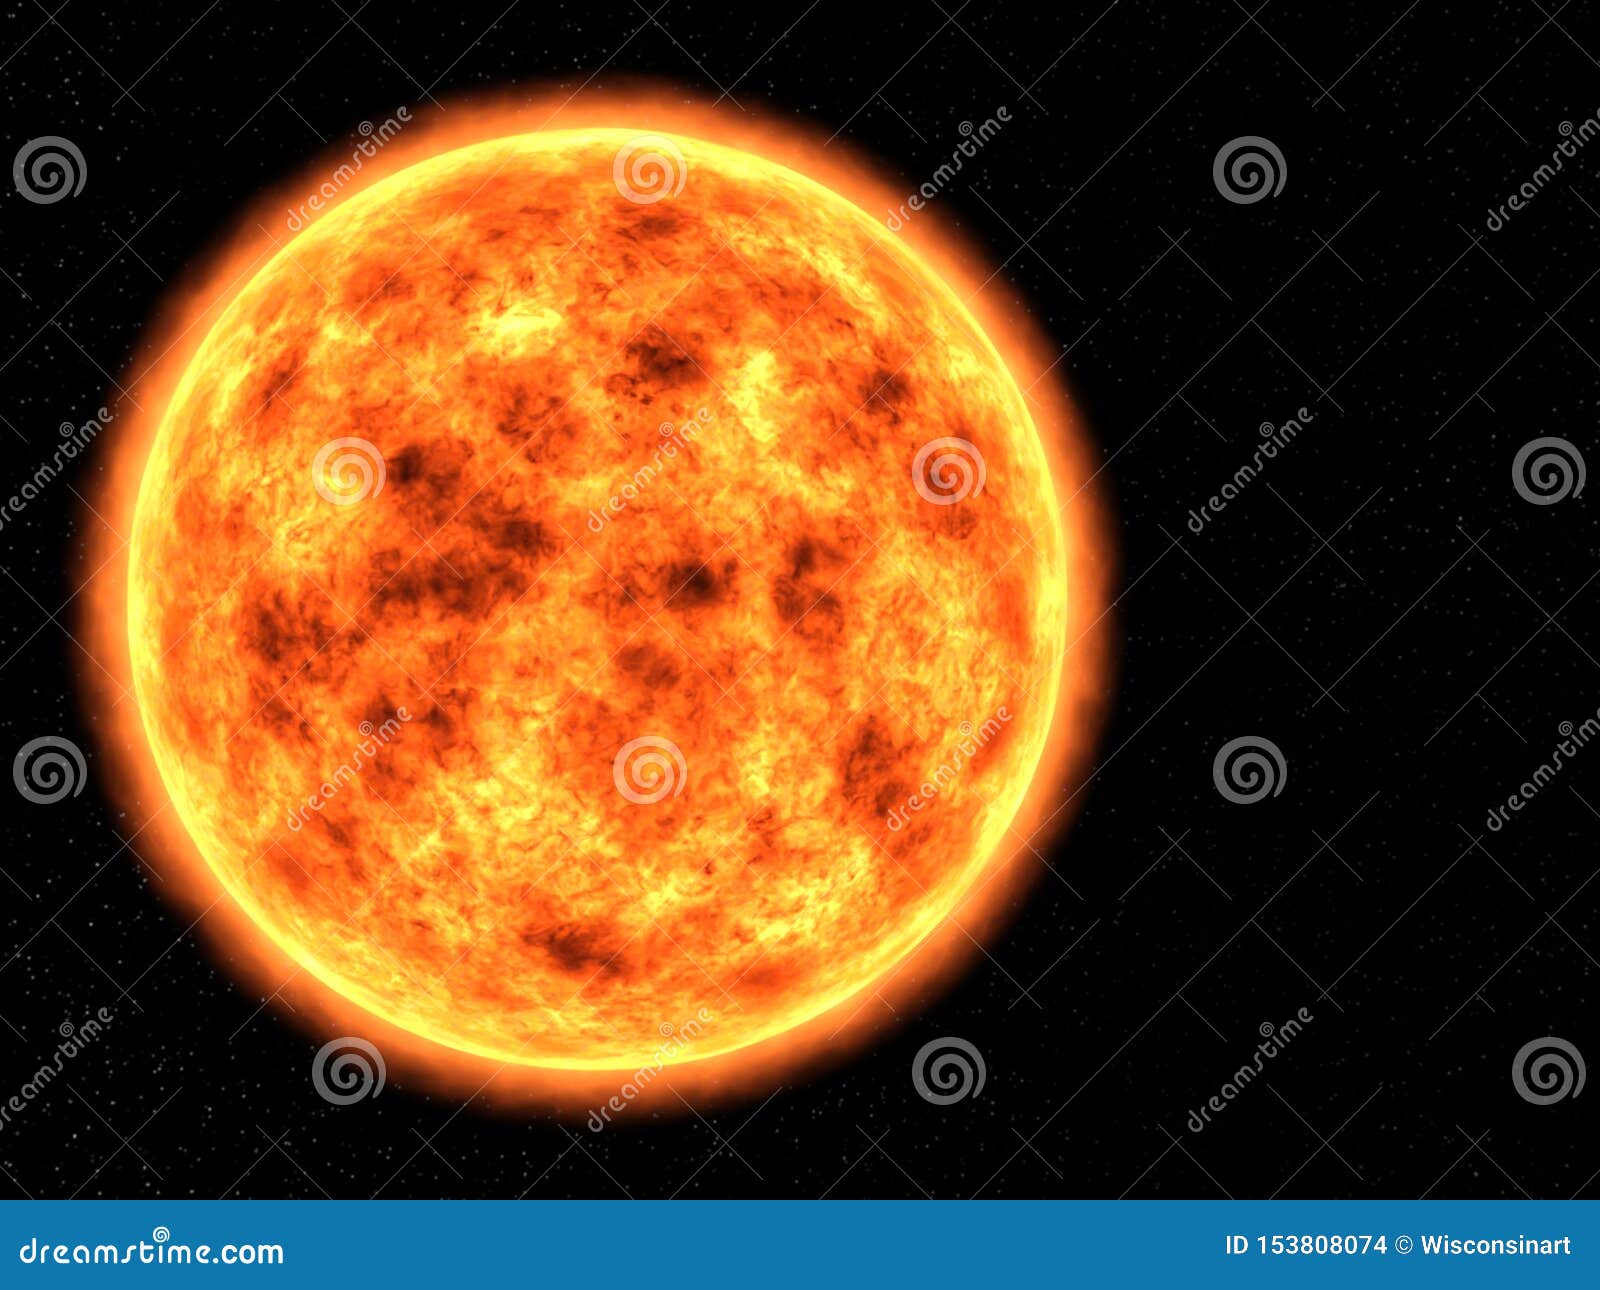 sun, outer space, solar system, star